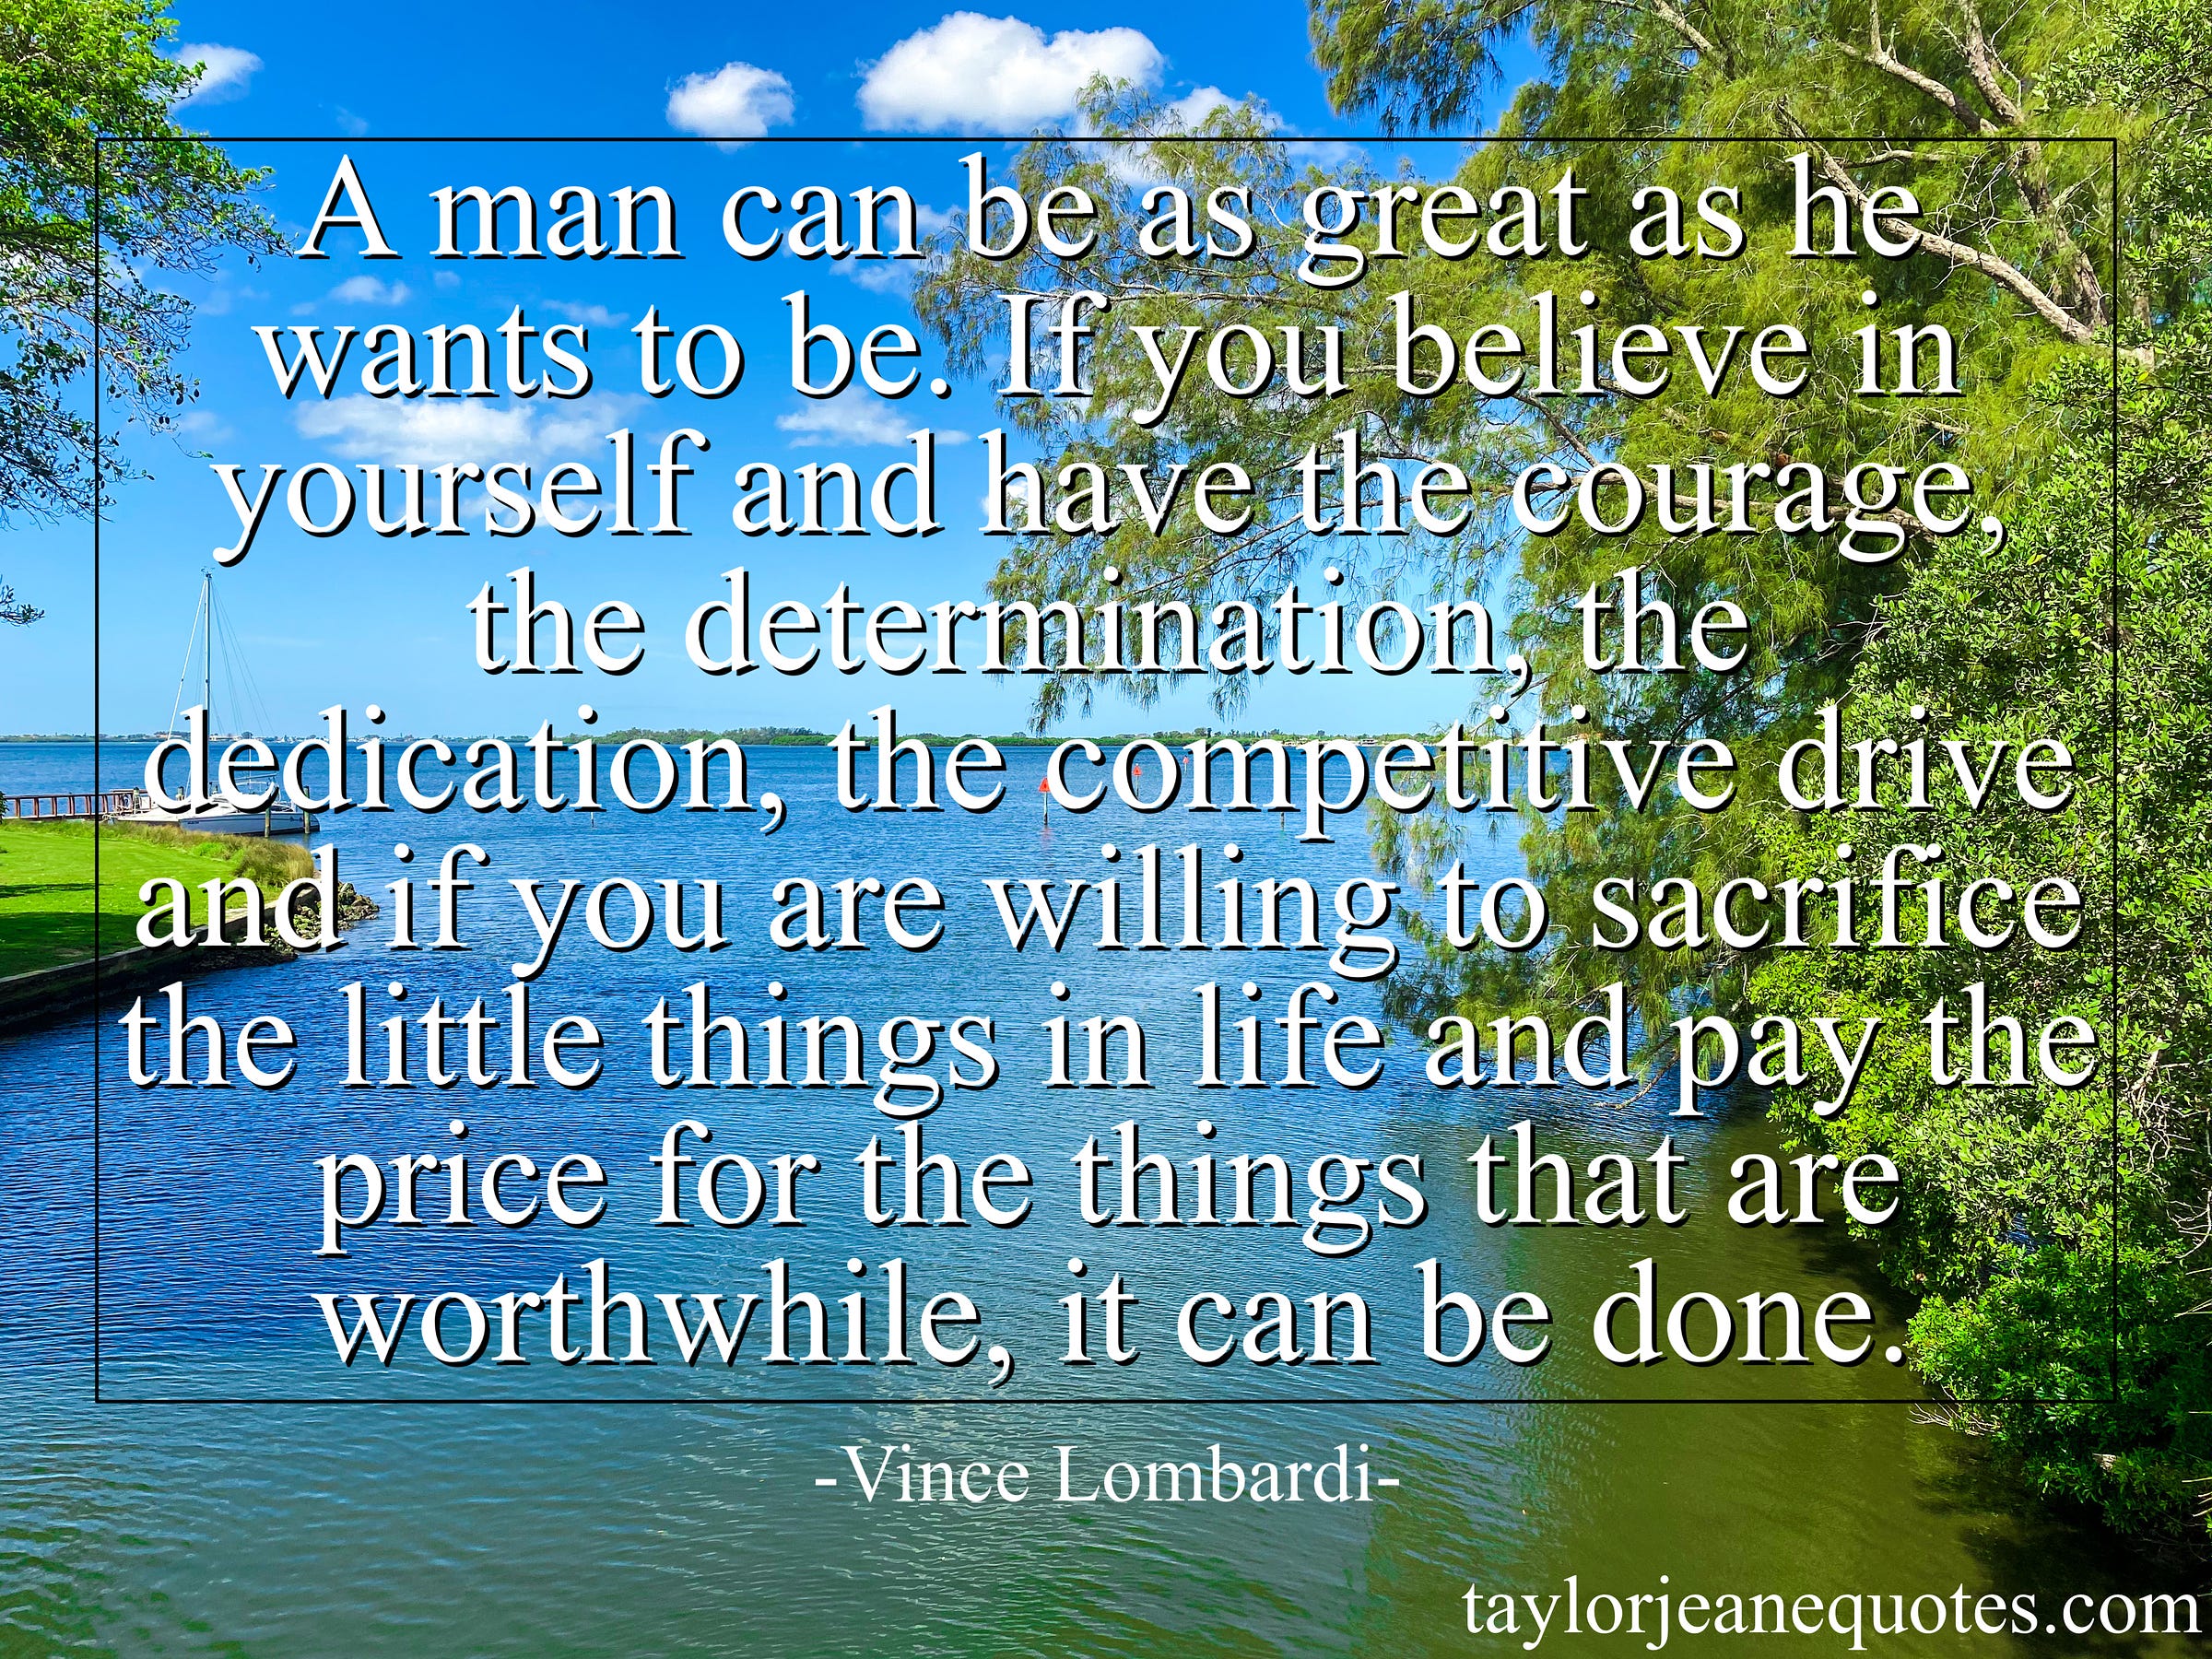 taylor jeane quotes, taylor jeane, taylor wilson, free quote of the day subscription, vince lombardi, vince lombardi quotes, determination quotes, motivational quotes, inspirational quotes, life quotes, courage quotes, dedication quotes, driven quotes, sacrifice quotes, bravery quotes, goal quotes